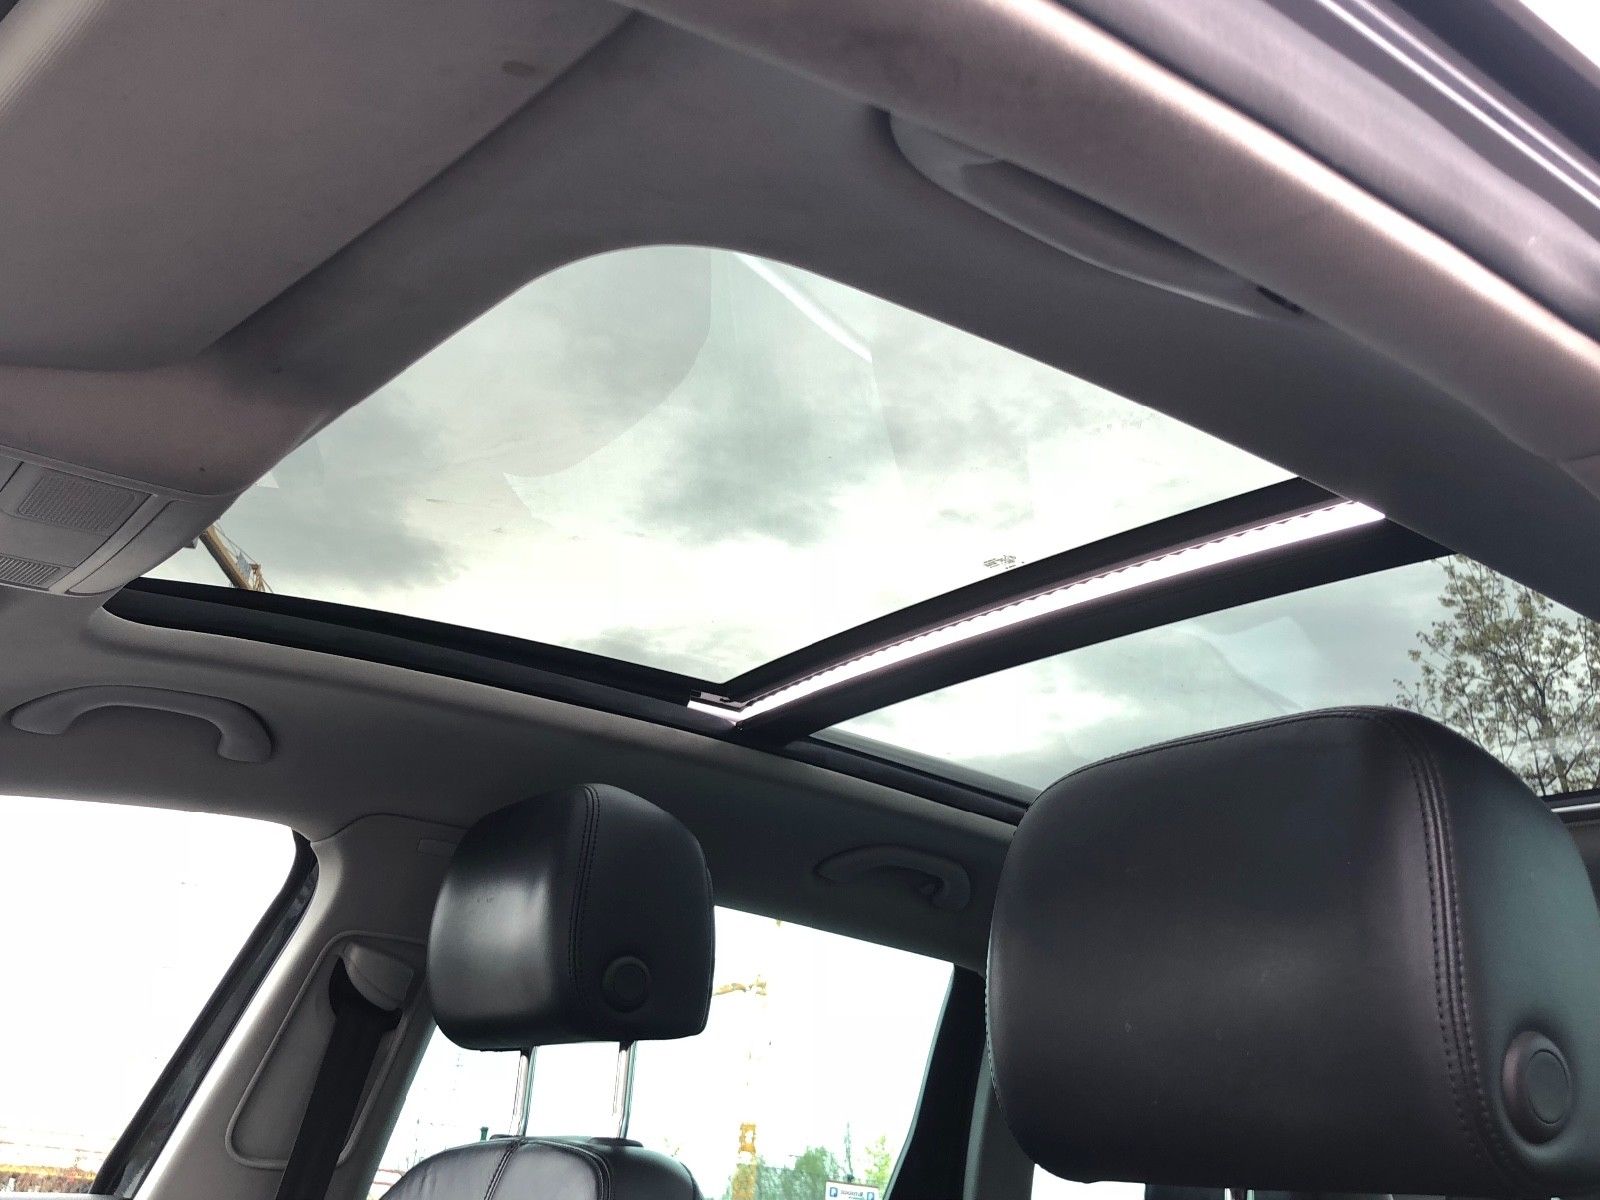 sunroof | Different Car Review